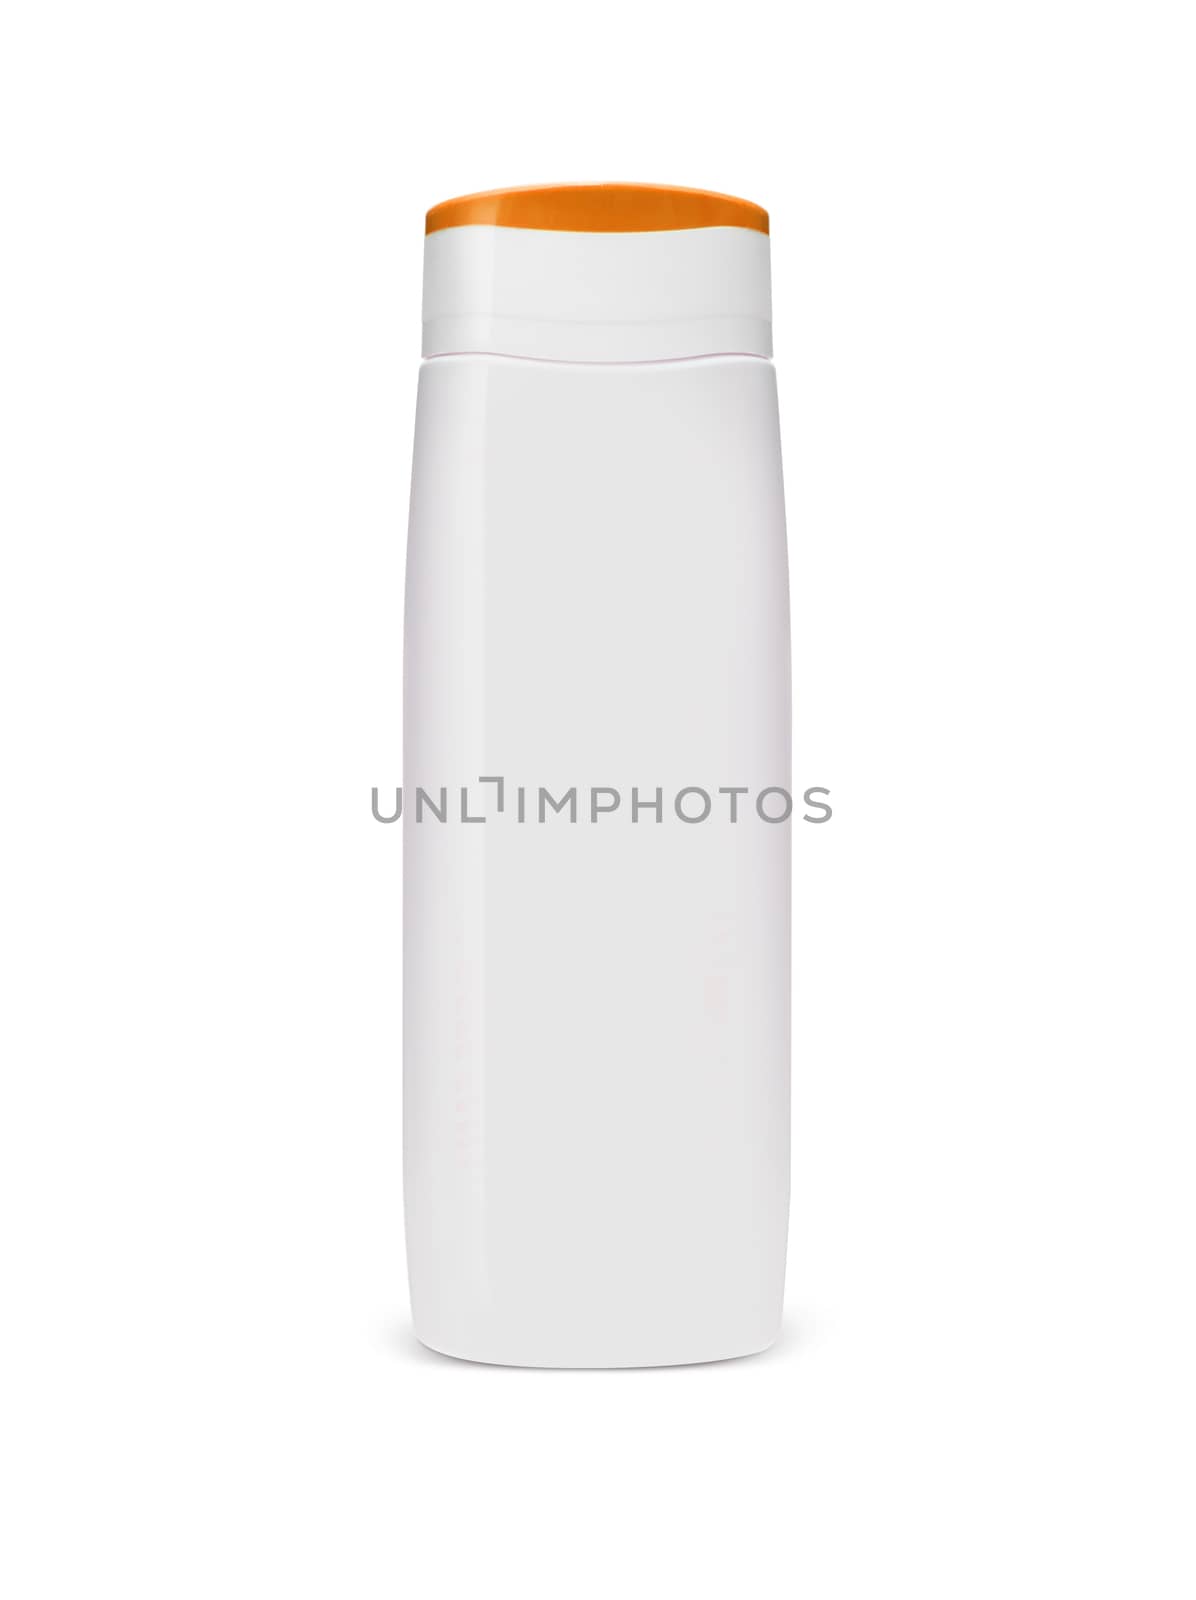 Blank white plastic cosmetics, shampoo or gel bottle, isolated on white background. Clipping Path